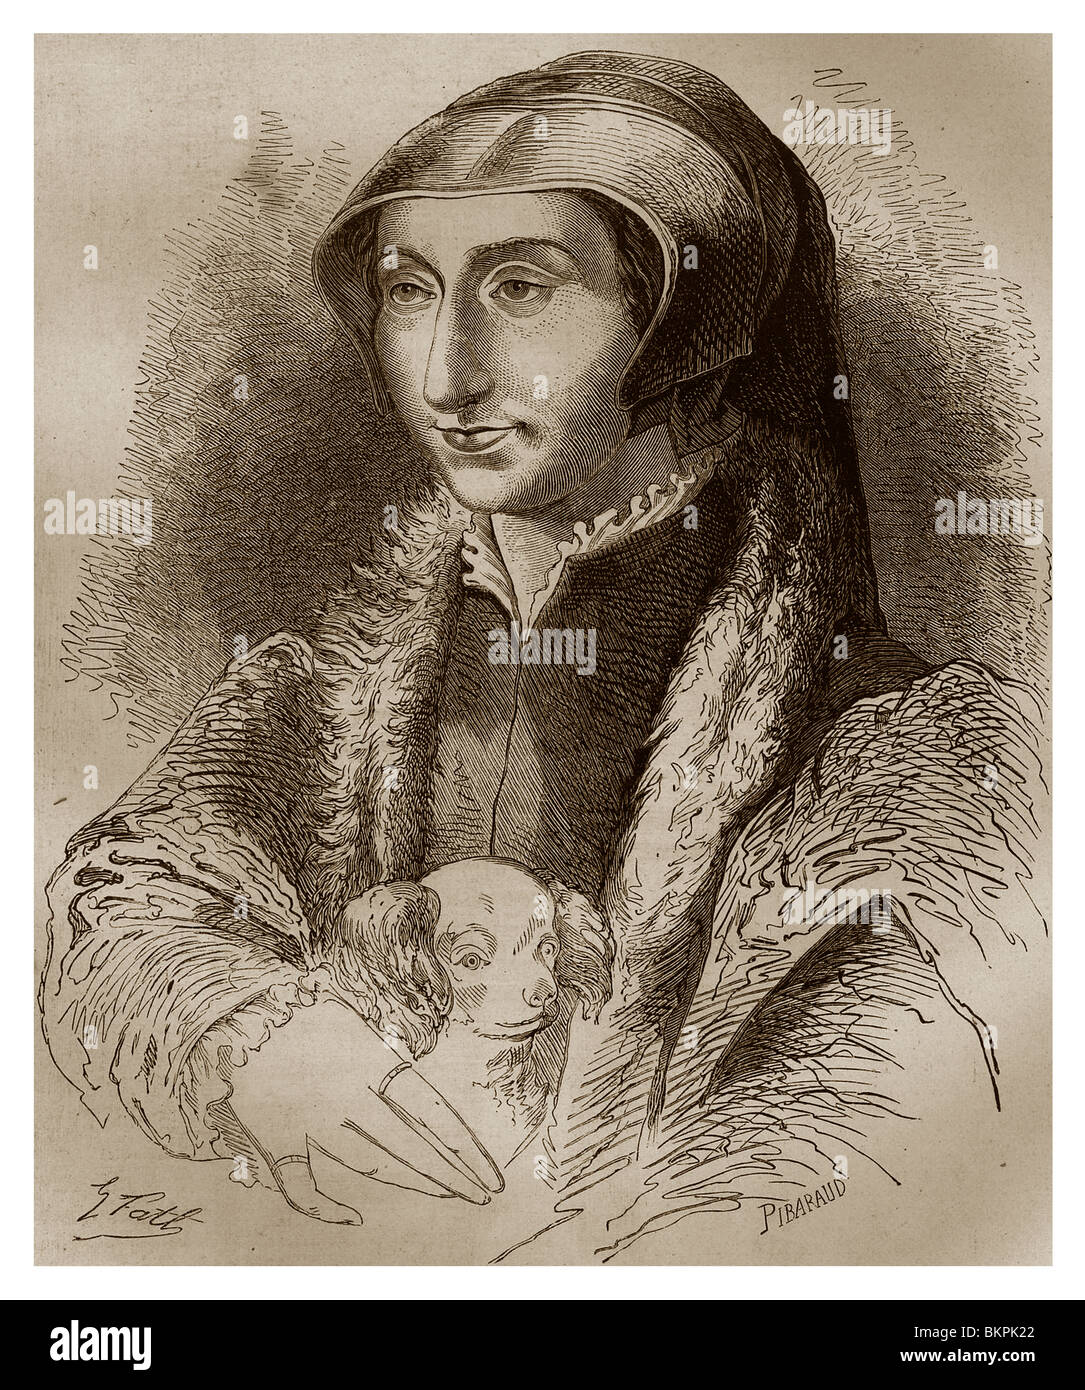 Marguerite de Valois (1492-1549): Sister of King Francis I of France and Queen Consort of Navarre. Stock Photo